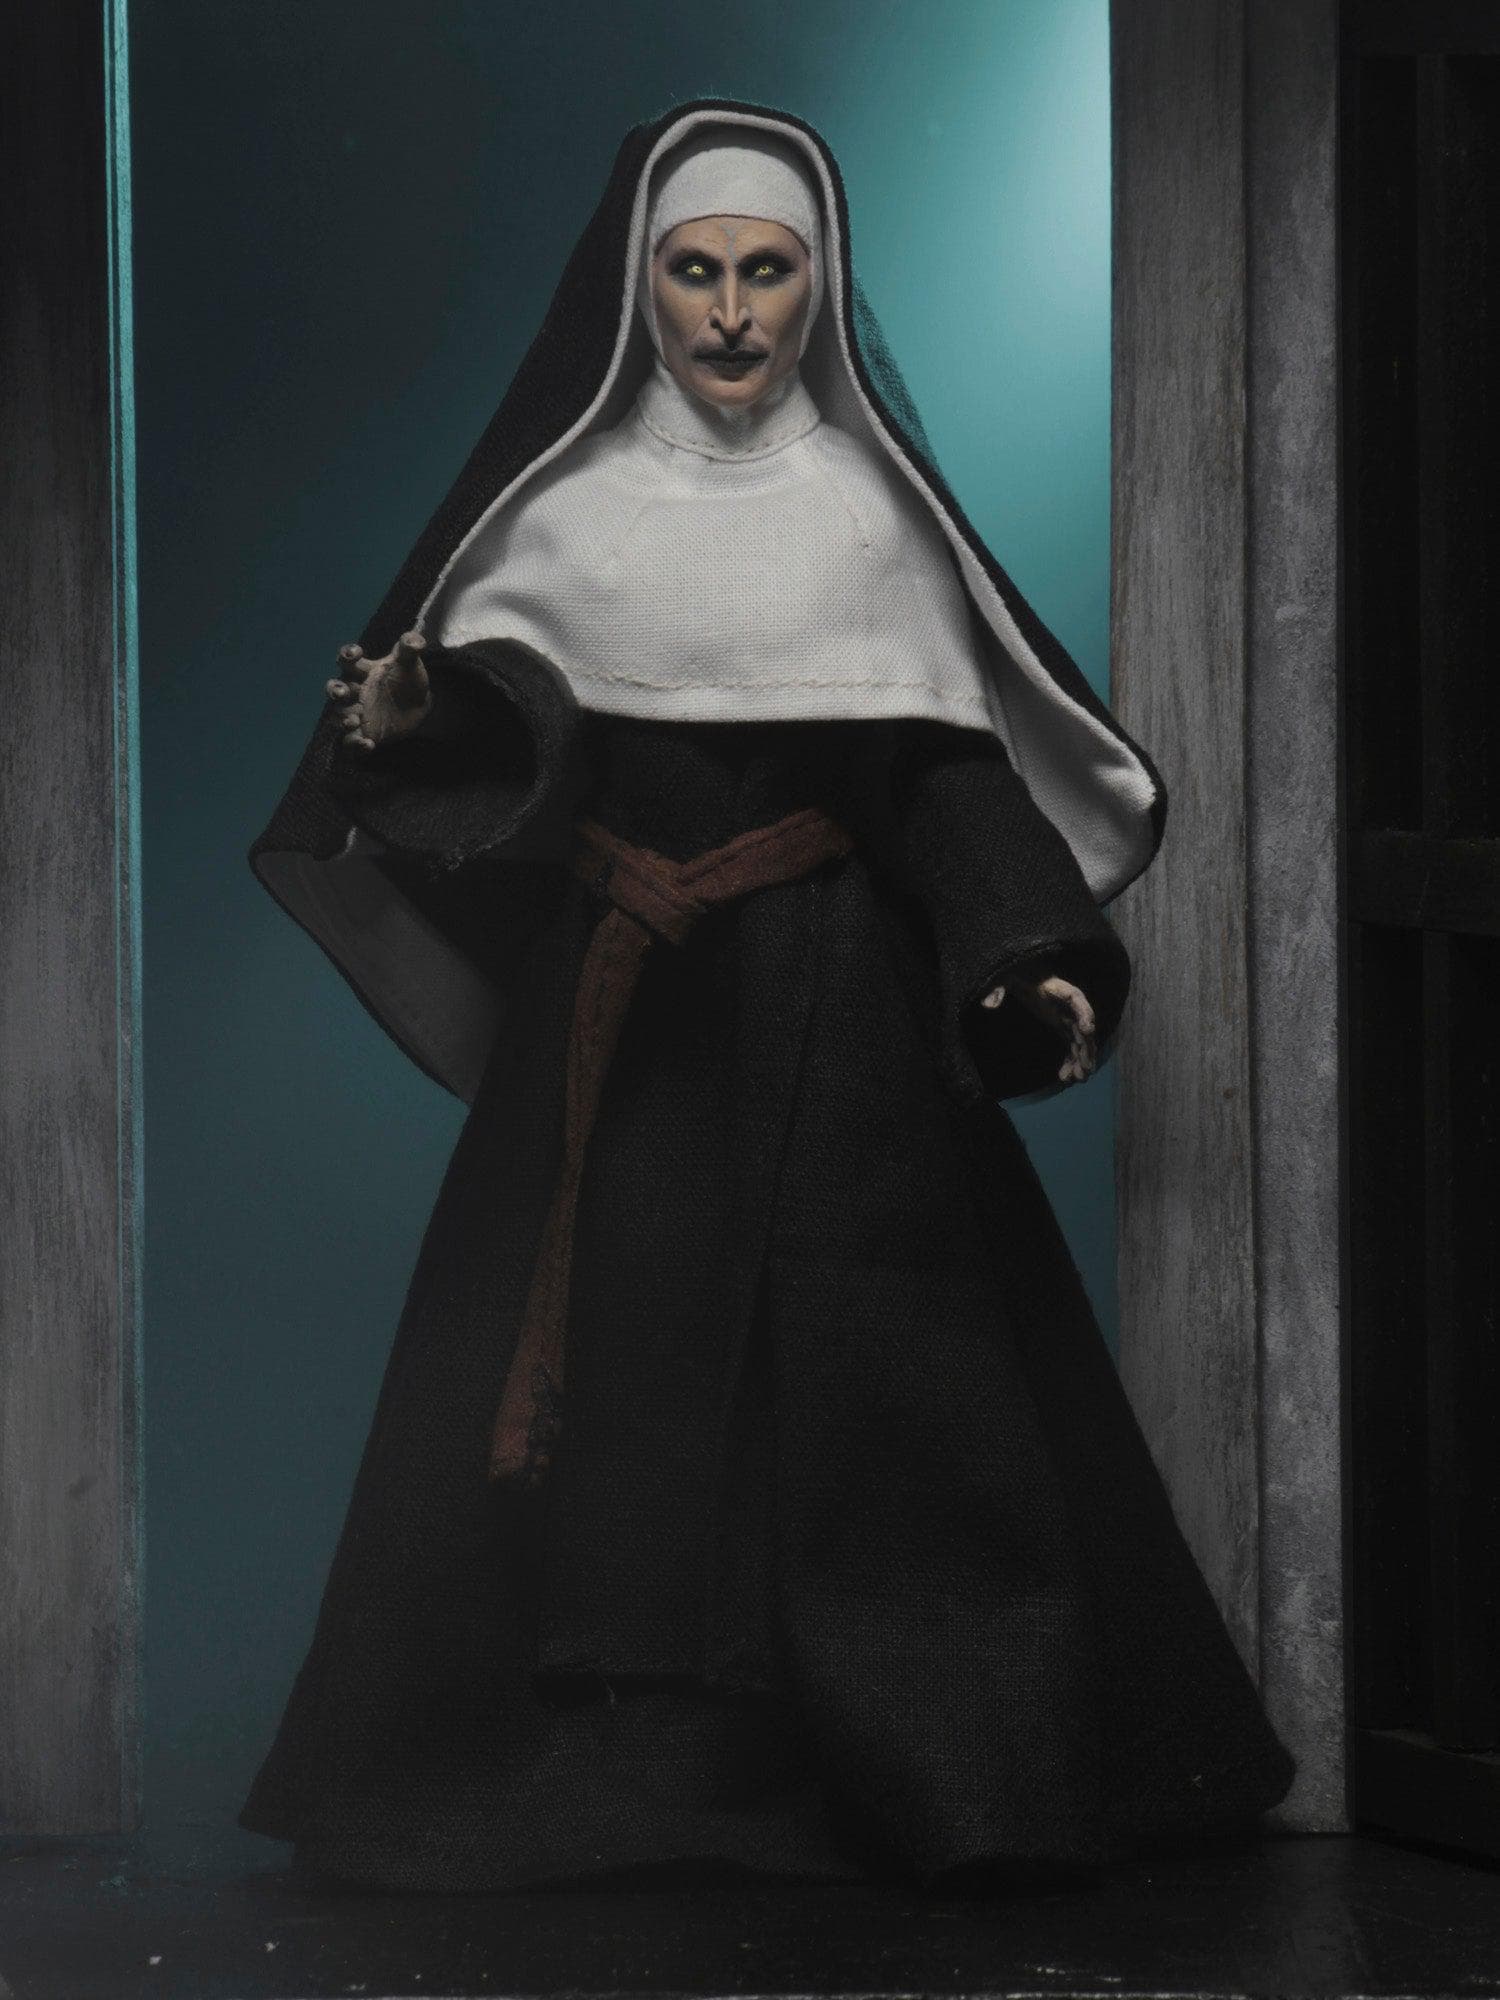 NECA - The Nun - 8" Clothed Action Figure - The Nun - costumes.com